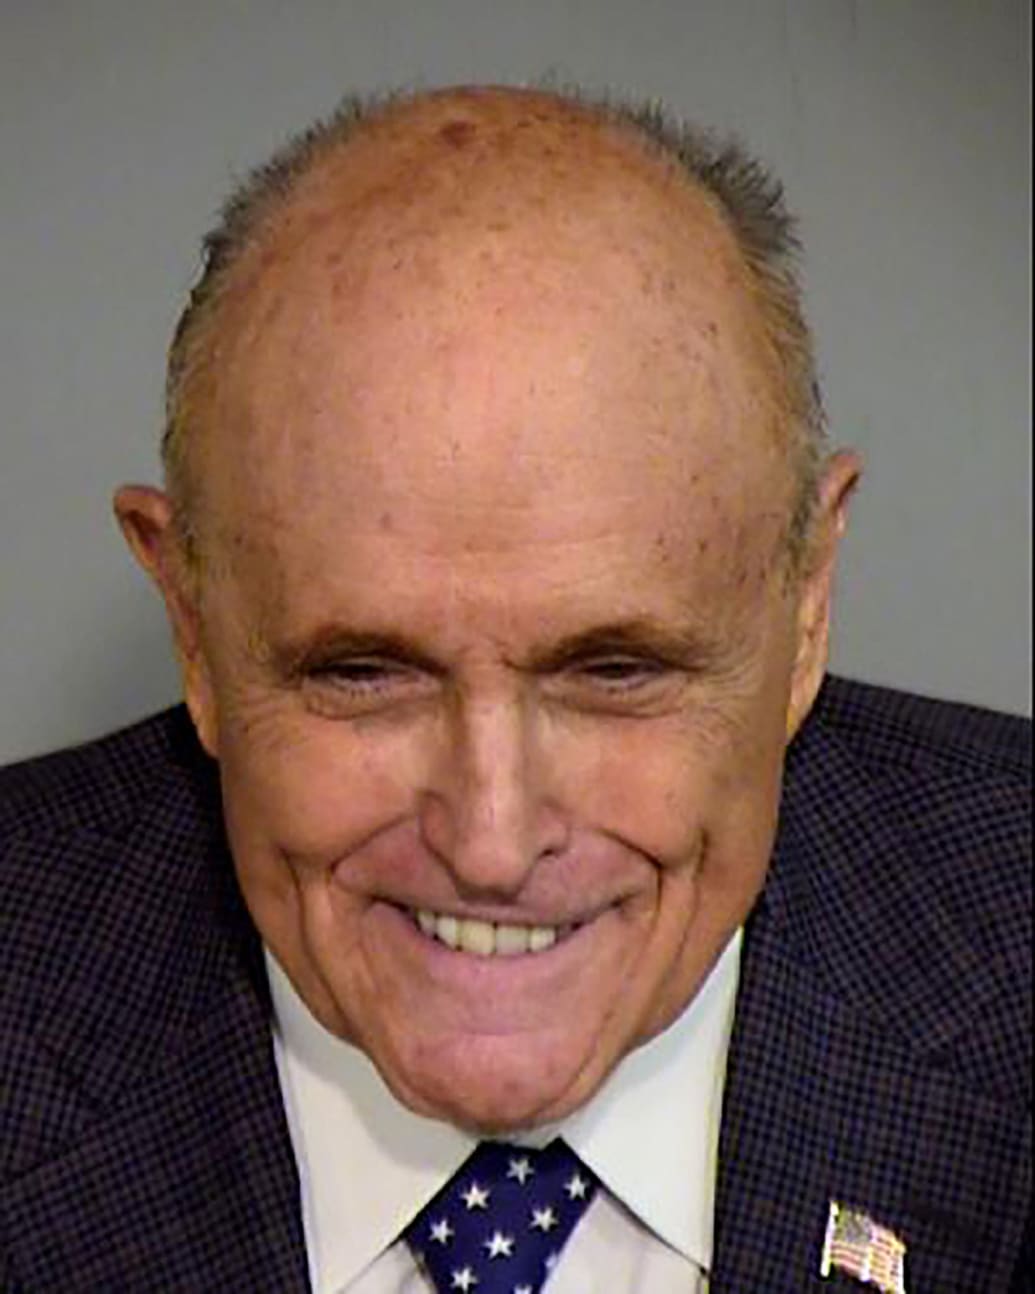 Rudy Giuliani poses for a Maricopa County Sheriff's Office booking photograph.